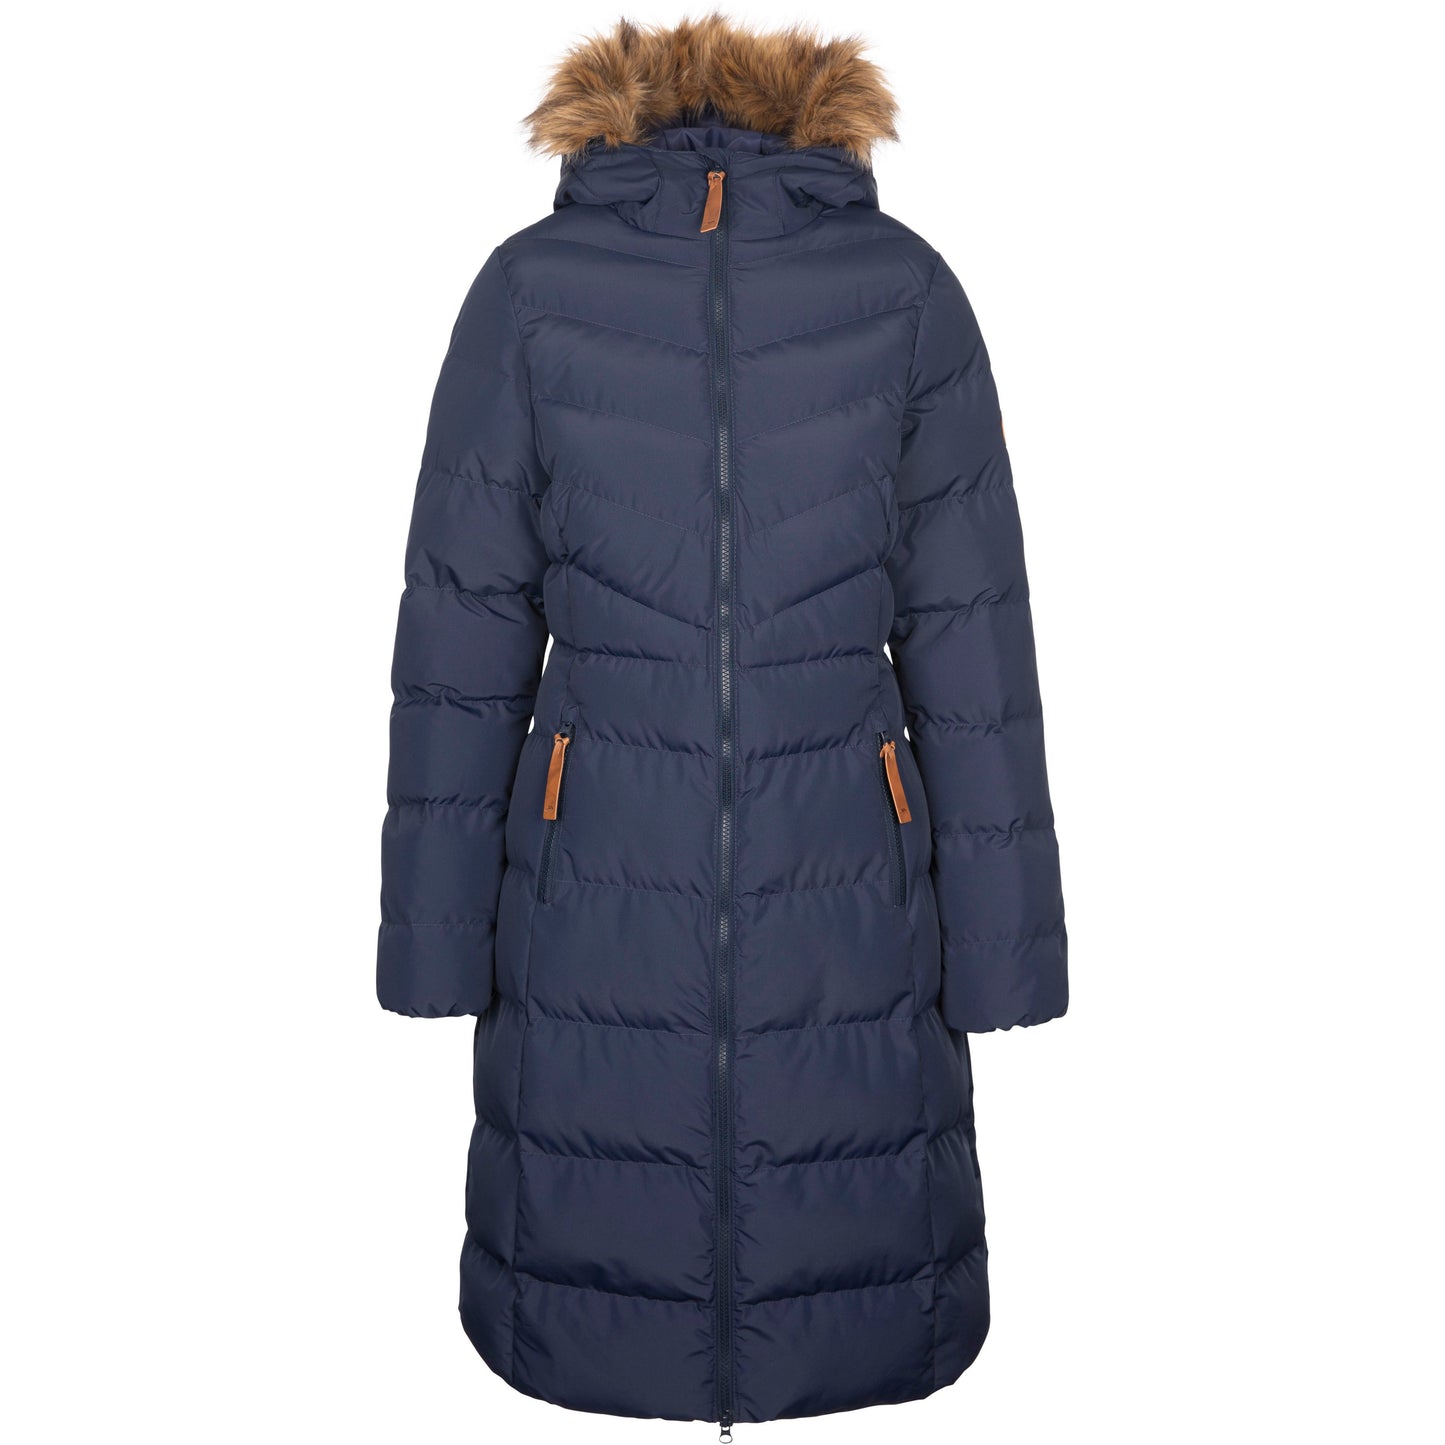 Audrey Women's Padded Long Length Jacket in Navy